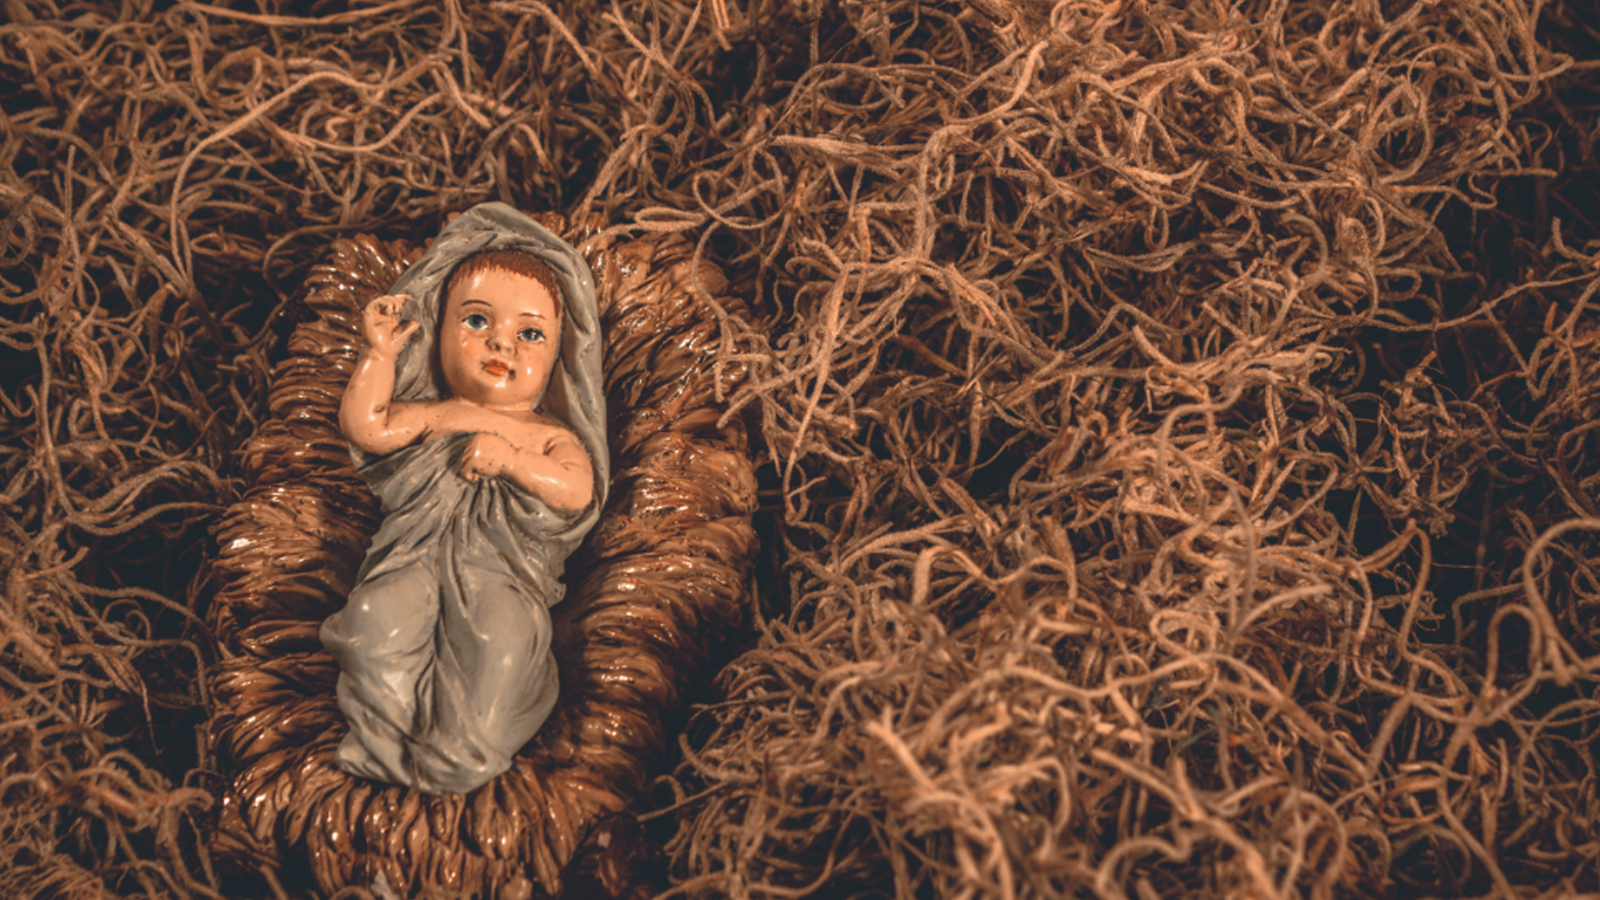 What Is The Deal With The Virgin Birth